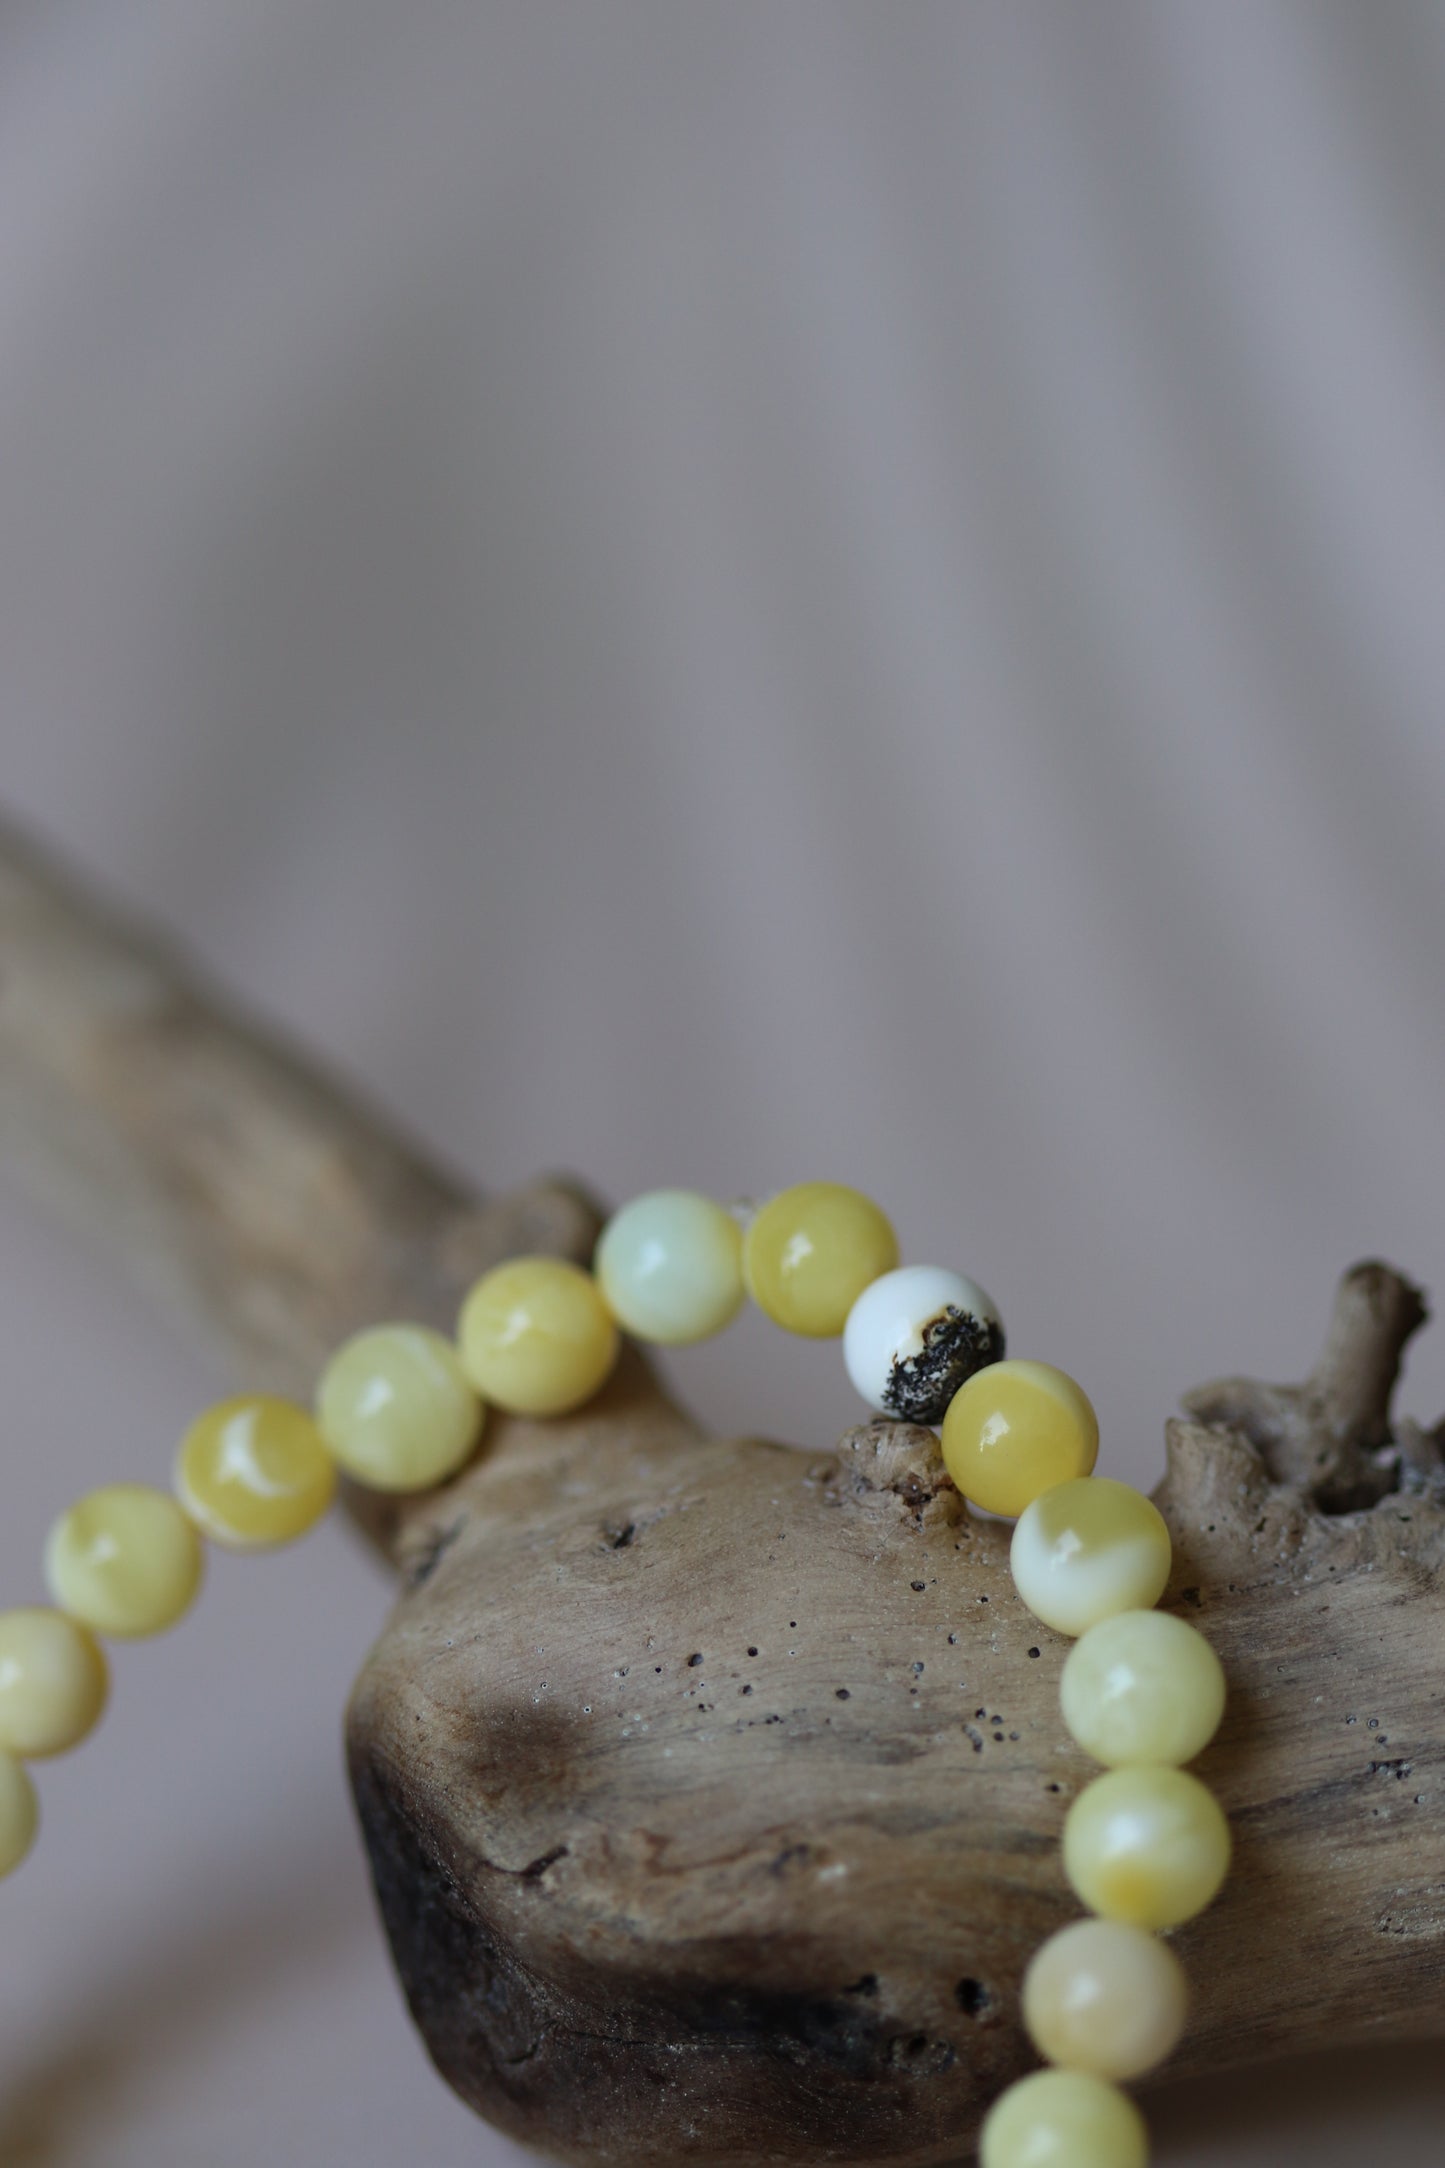 Unique Royal White Amber Beaded Bracelet with Black Inclusion